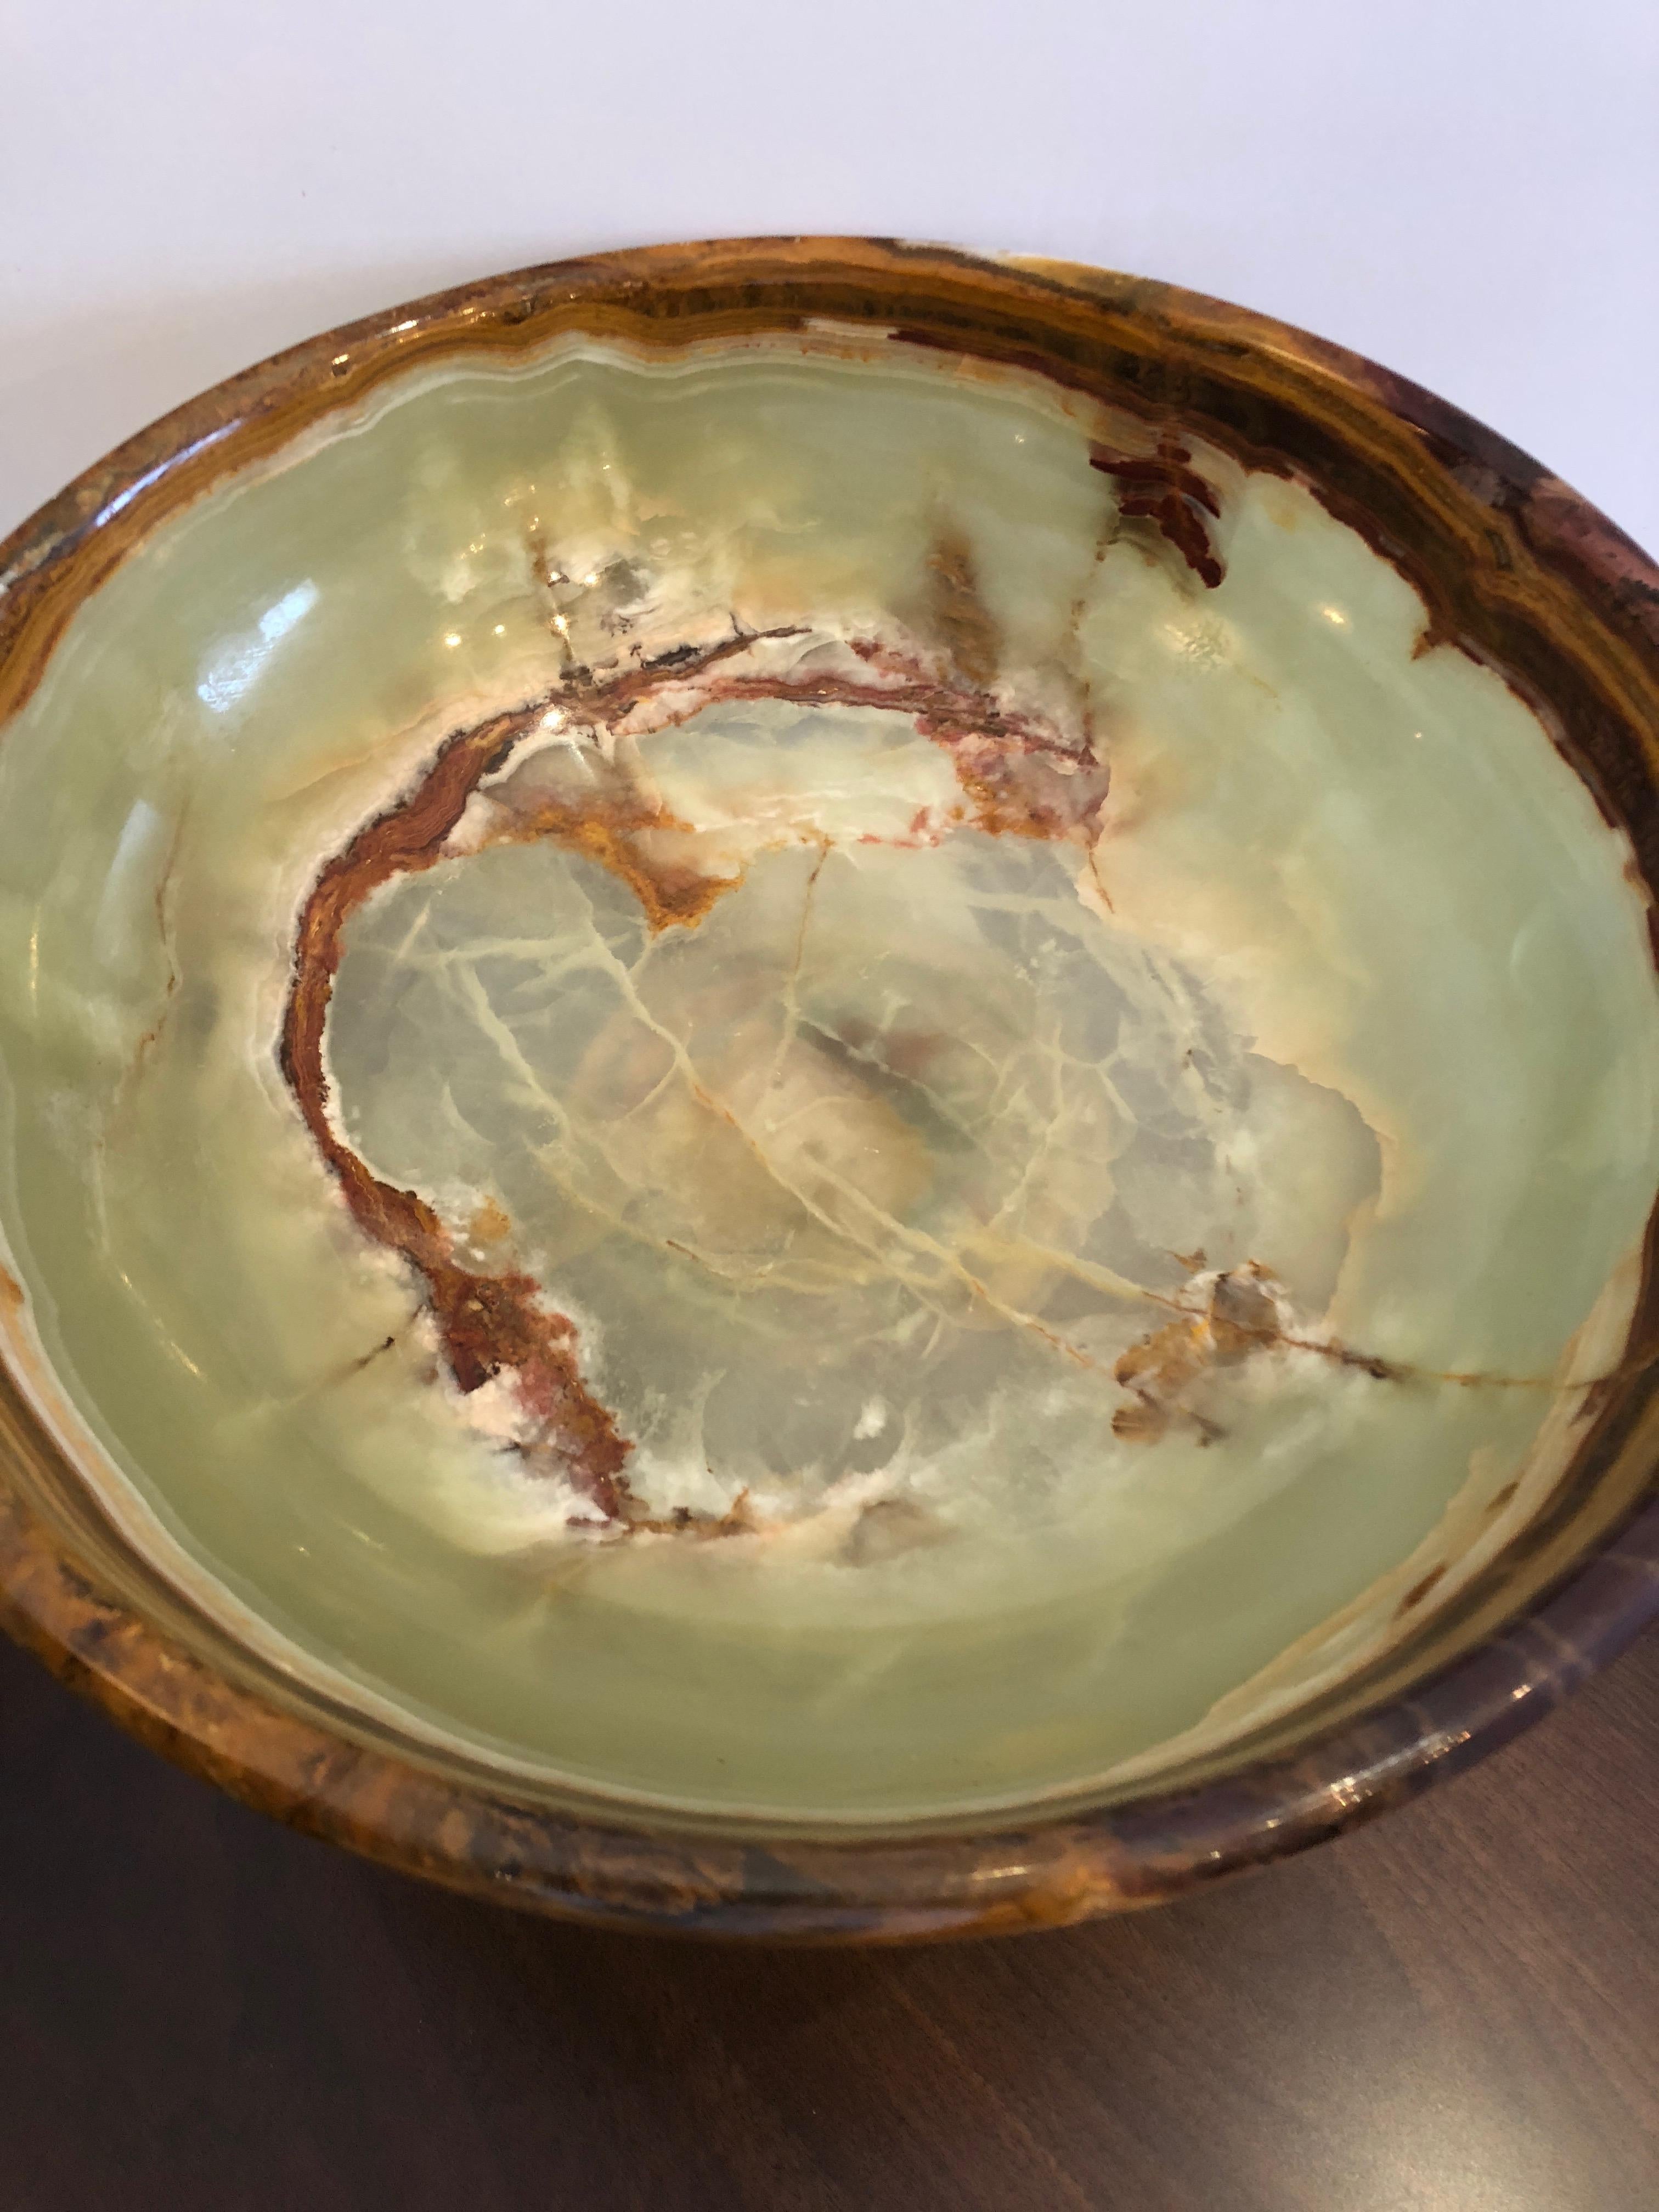 Absolutely gorgeous onyx centerpiece bowl of luscious colors including a pale green, cream, burnt orange and brown. Heavy and impressive. Interior depth 3.5 inches.